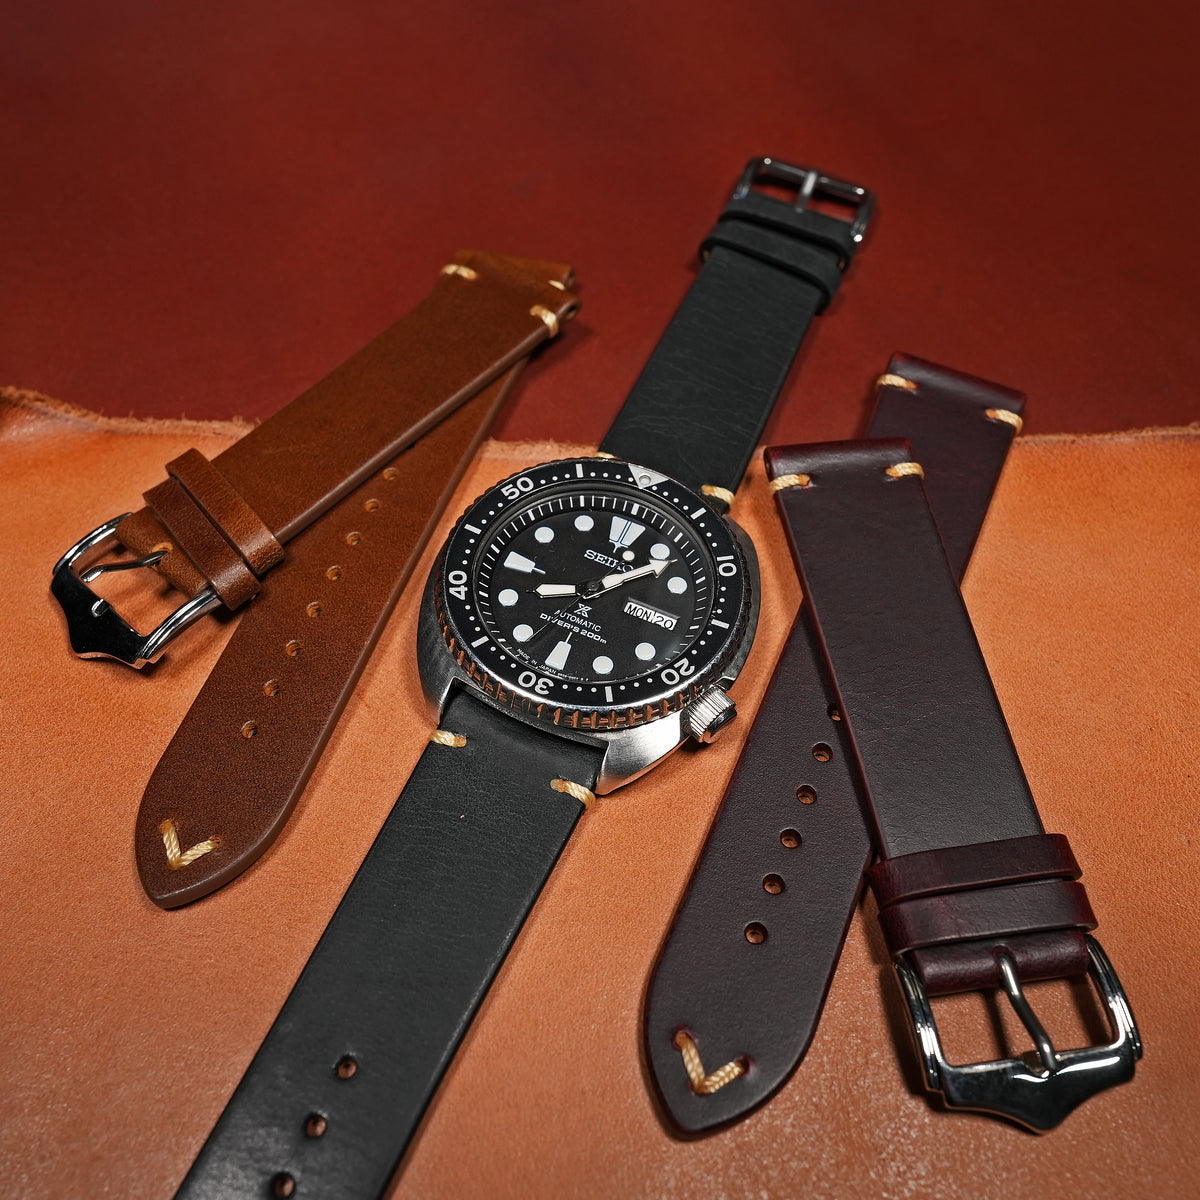 Premium Vintage Oil Waxed Leather Watch Strap in Black - Nomad Watch Works SG